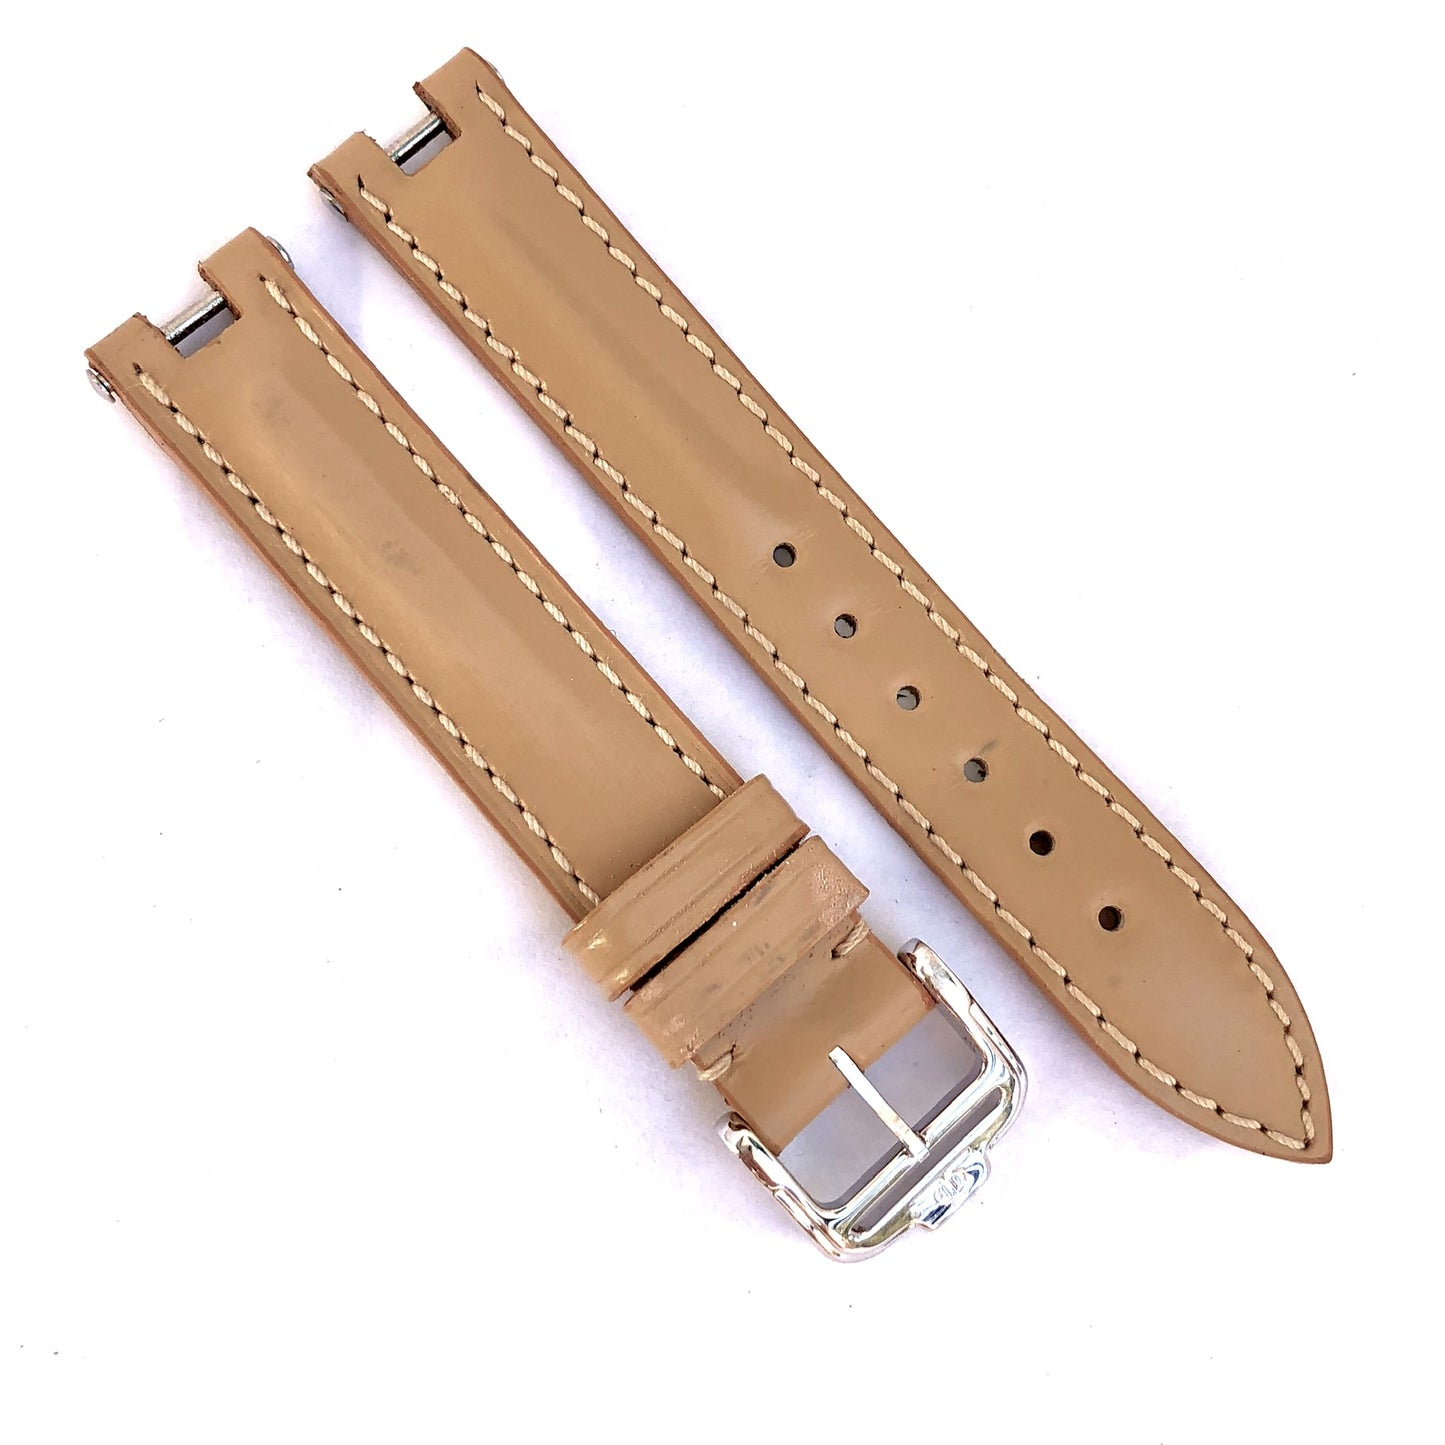 BAUME & MERCIER 14mm Beige Patent Leather Band Strap Original Silver Buckle SWISS MADE